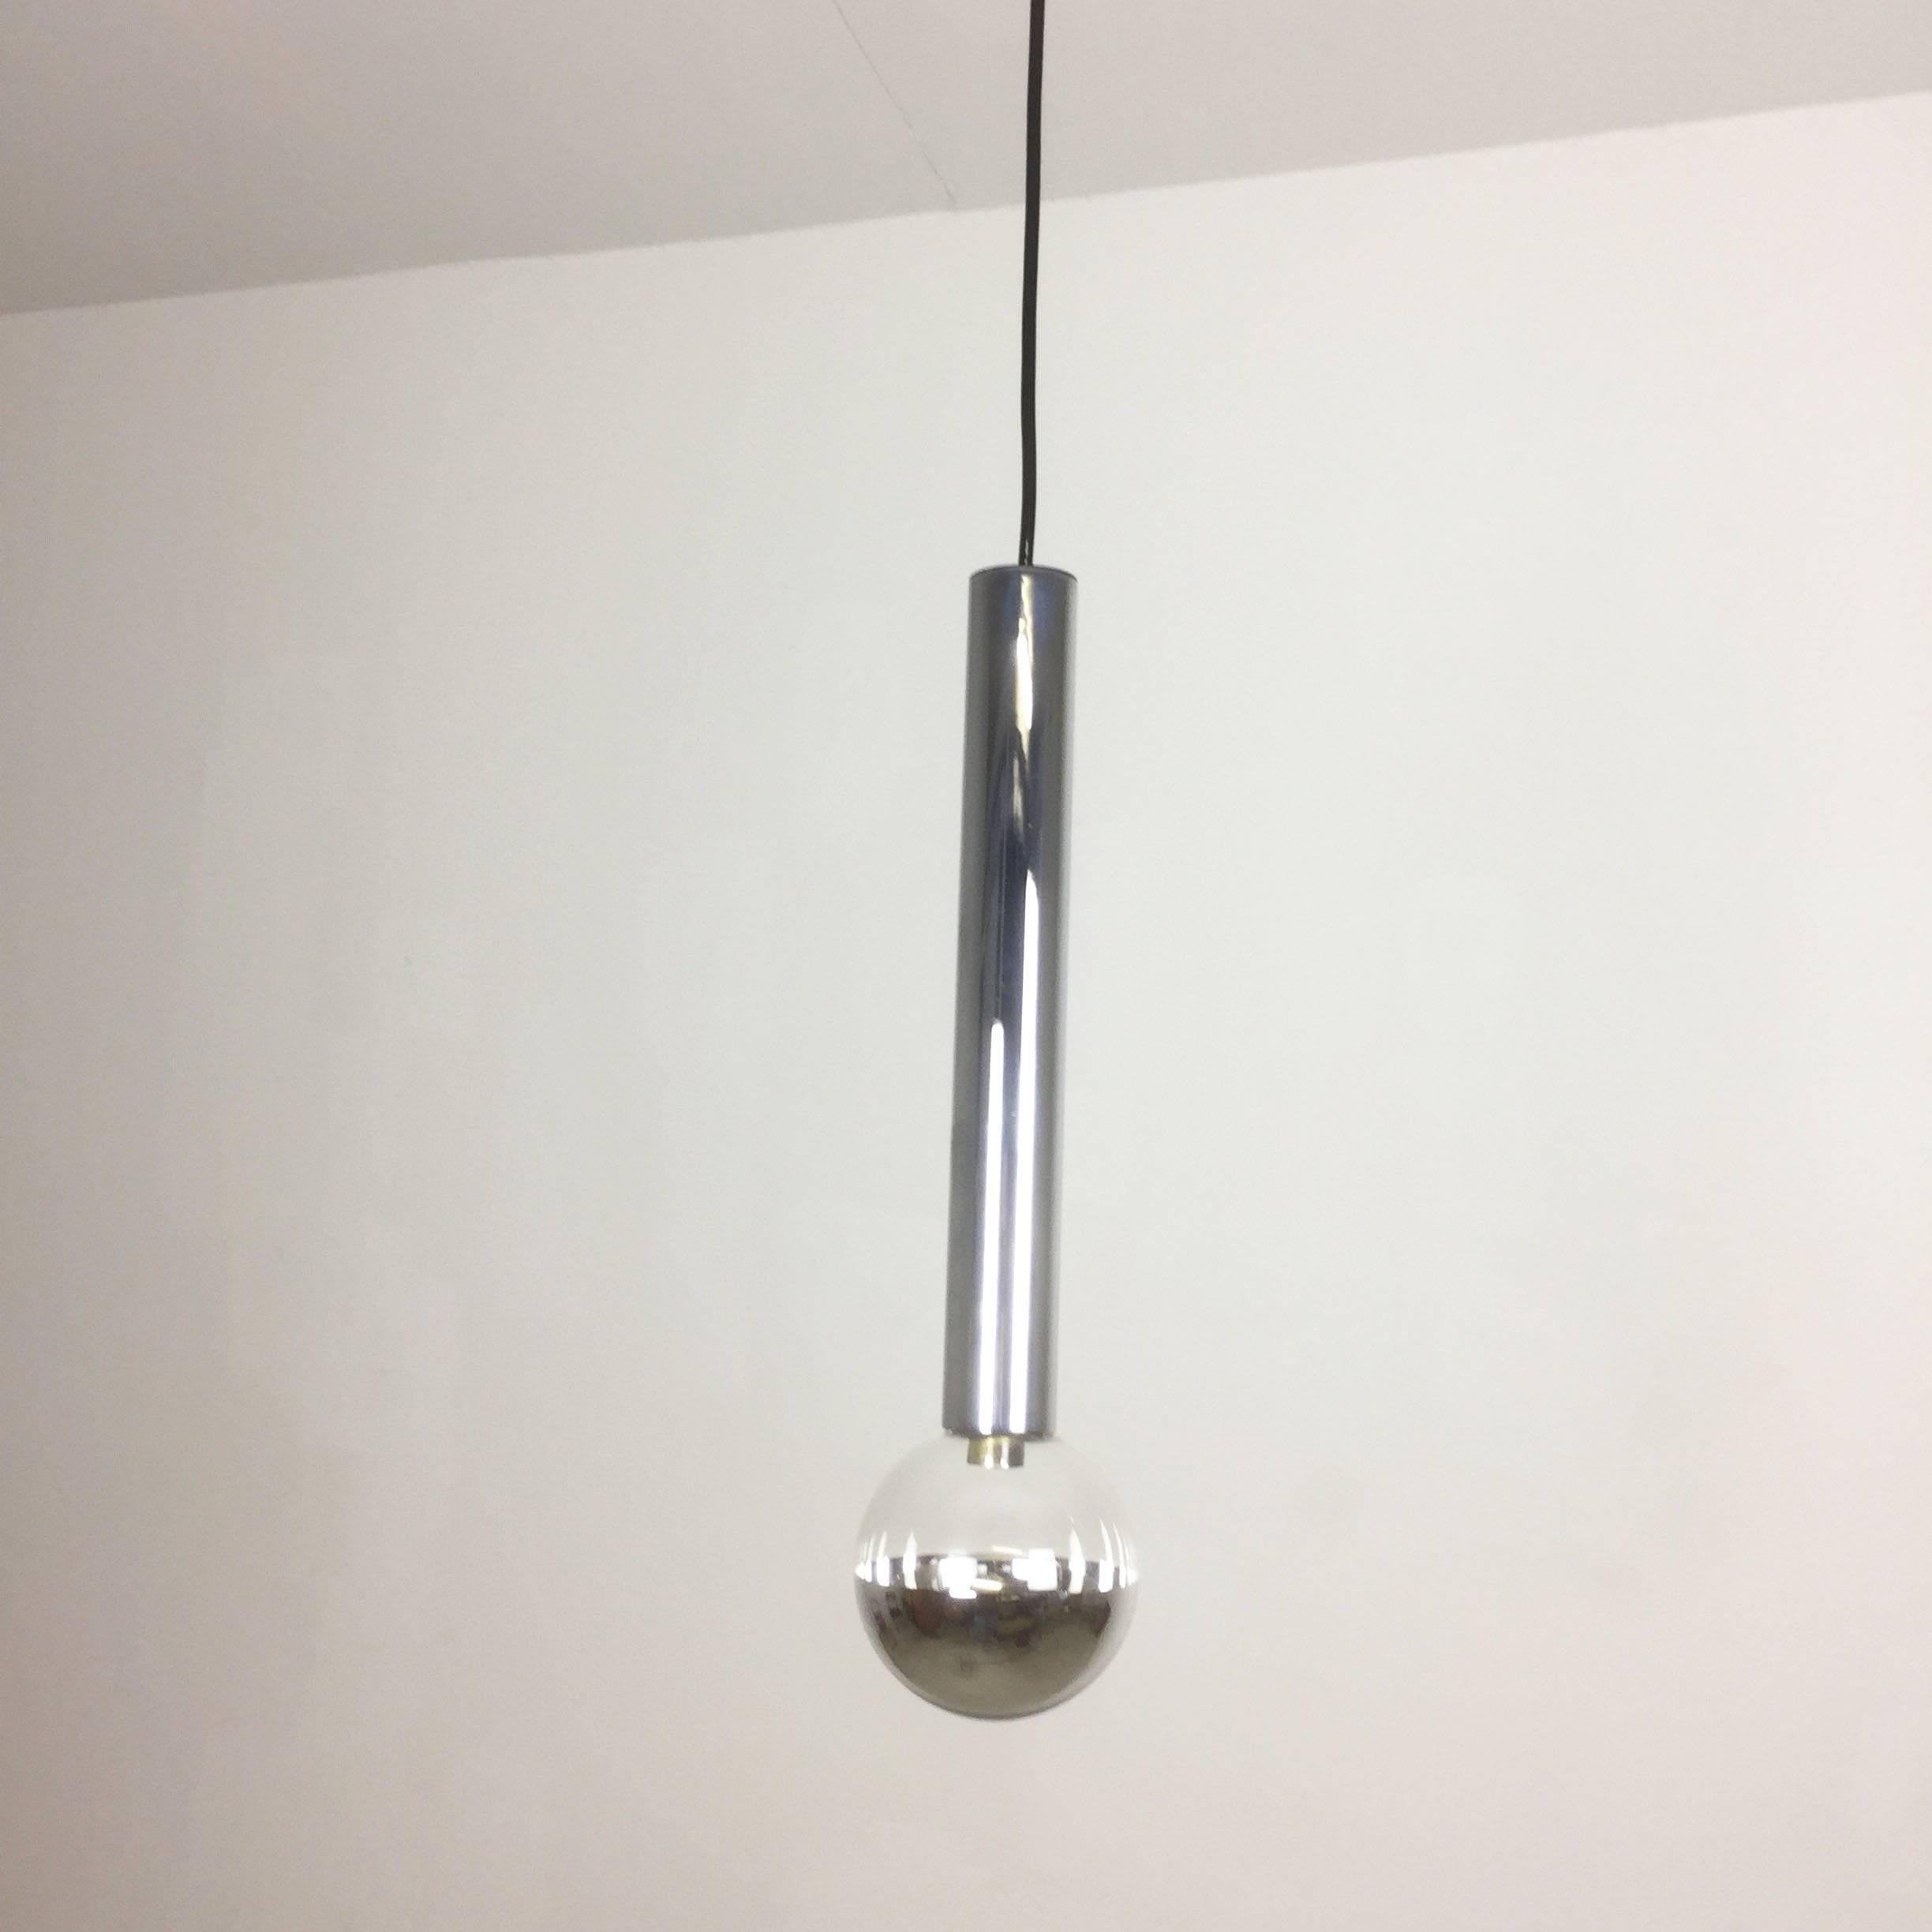 Mid-Century Modern 1970s Chrome hanging Lights Glass Bulb by Motoko Ishi for Staff Lights, Germany For Sale